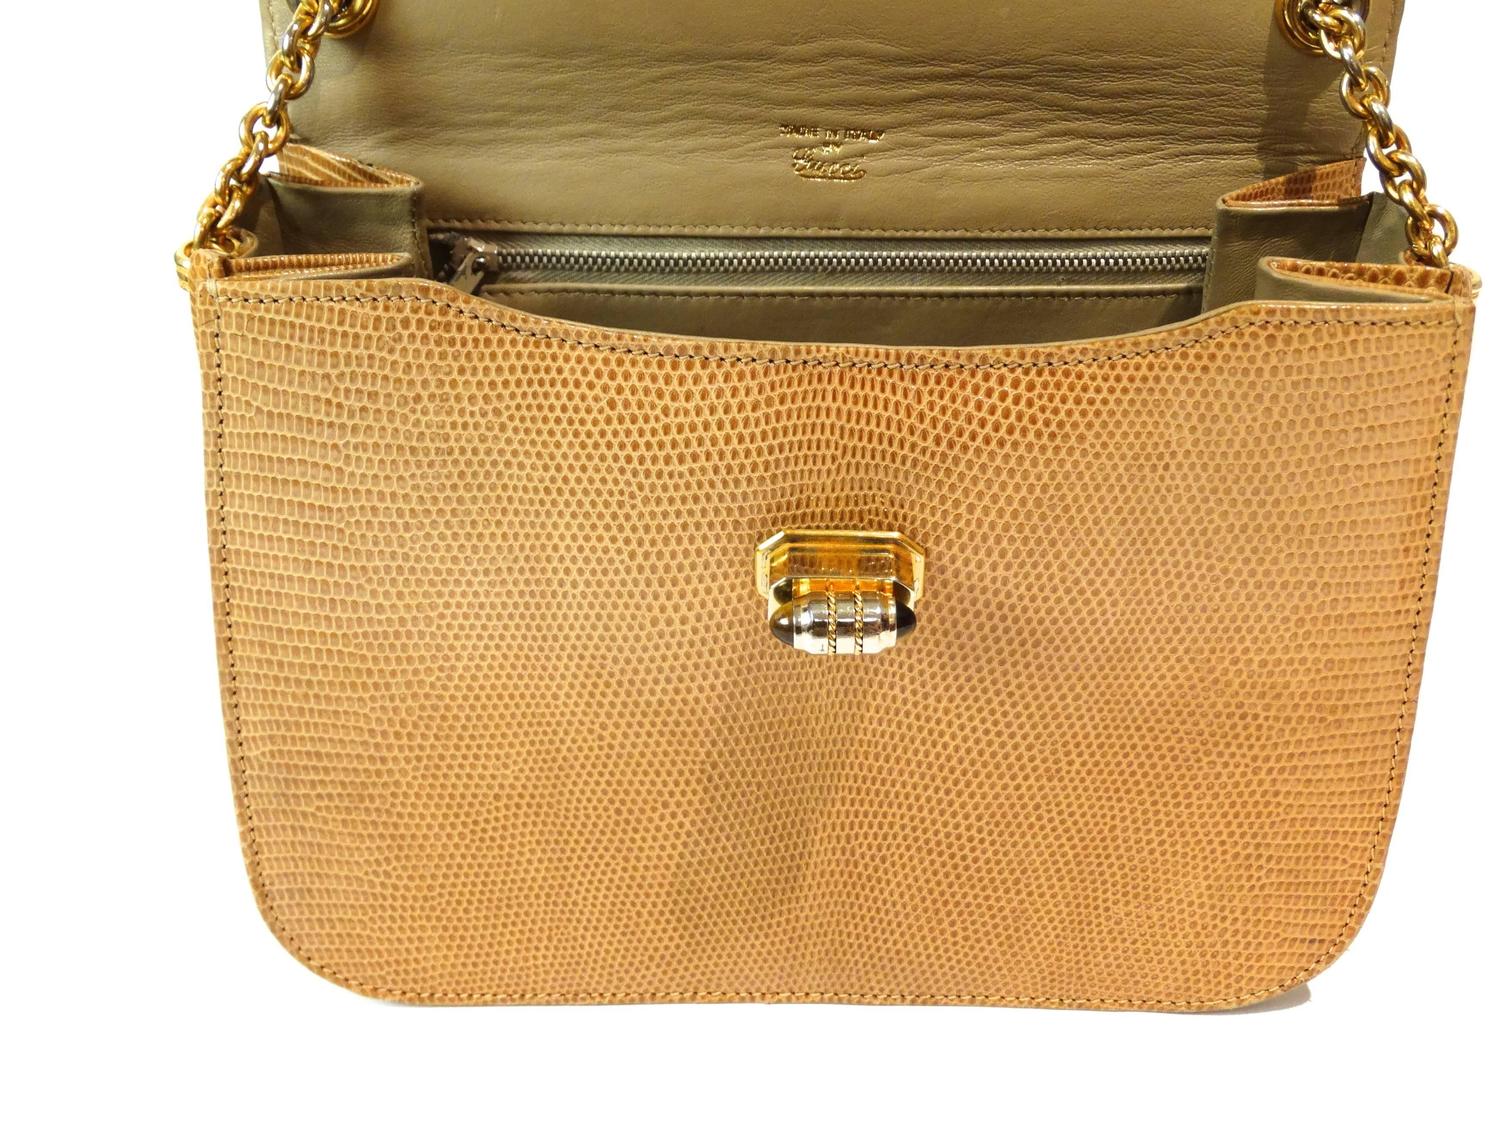 1970s Gucci Lizard Skin &quot;Tiger Eye&quot; Handbag with Gold Chain at 1stdibs